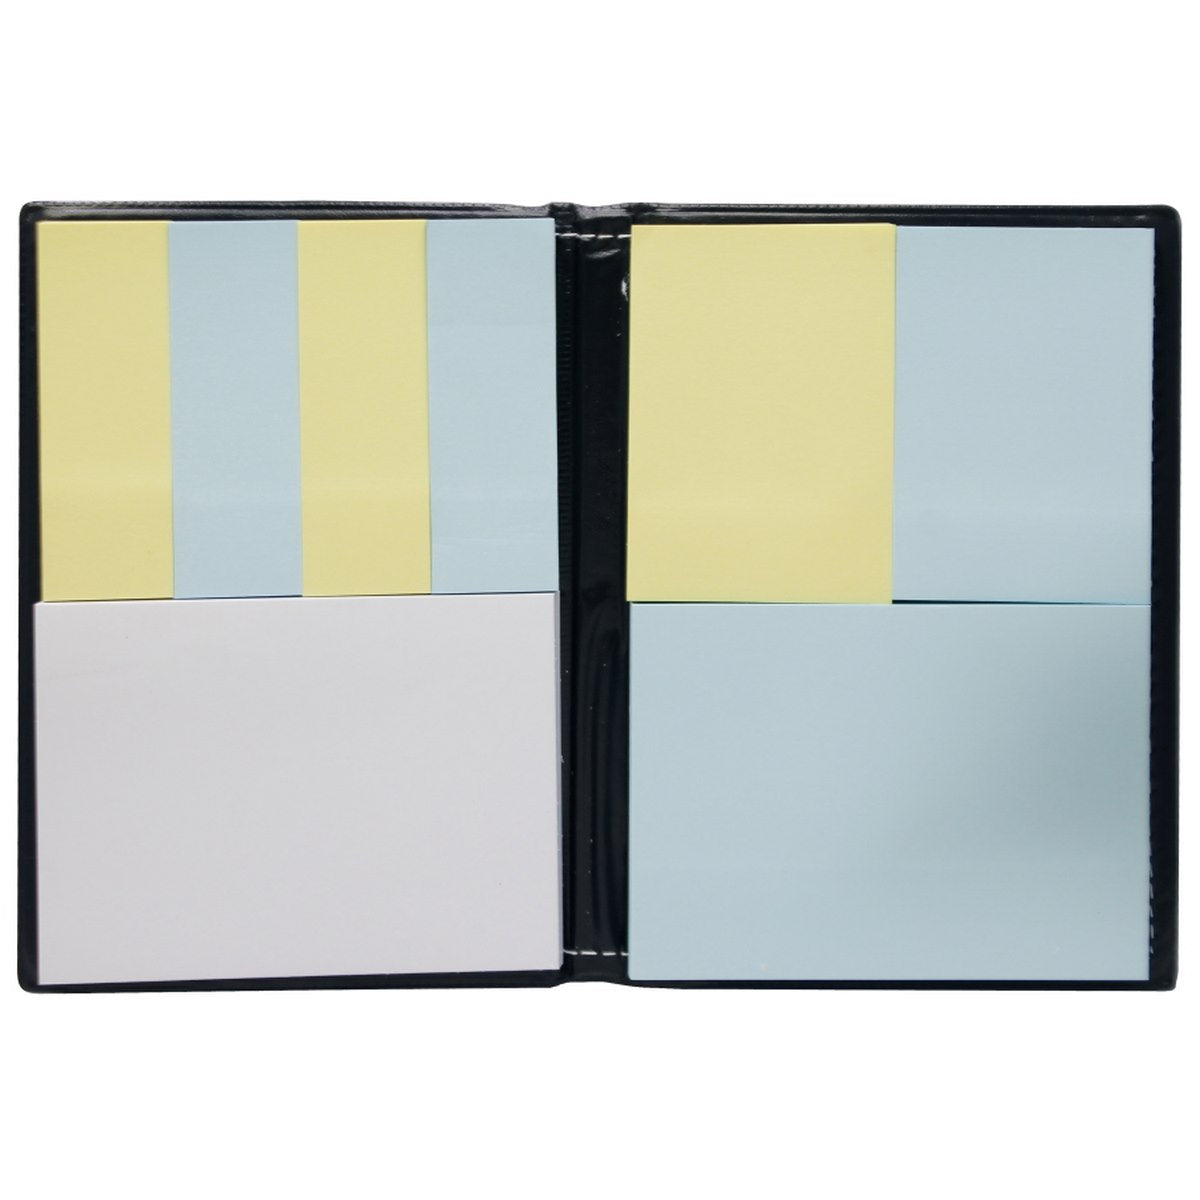 jags-mumbai Sticky Notes Stick Note Cover(Foam)